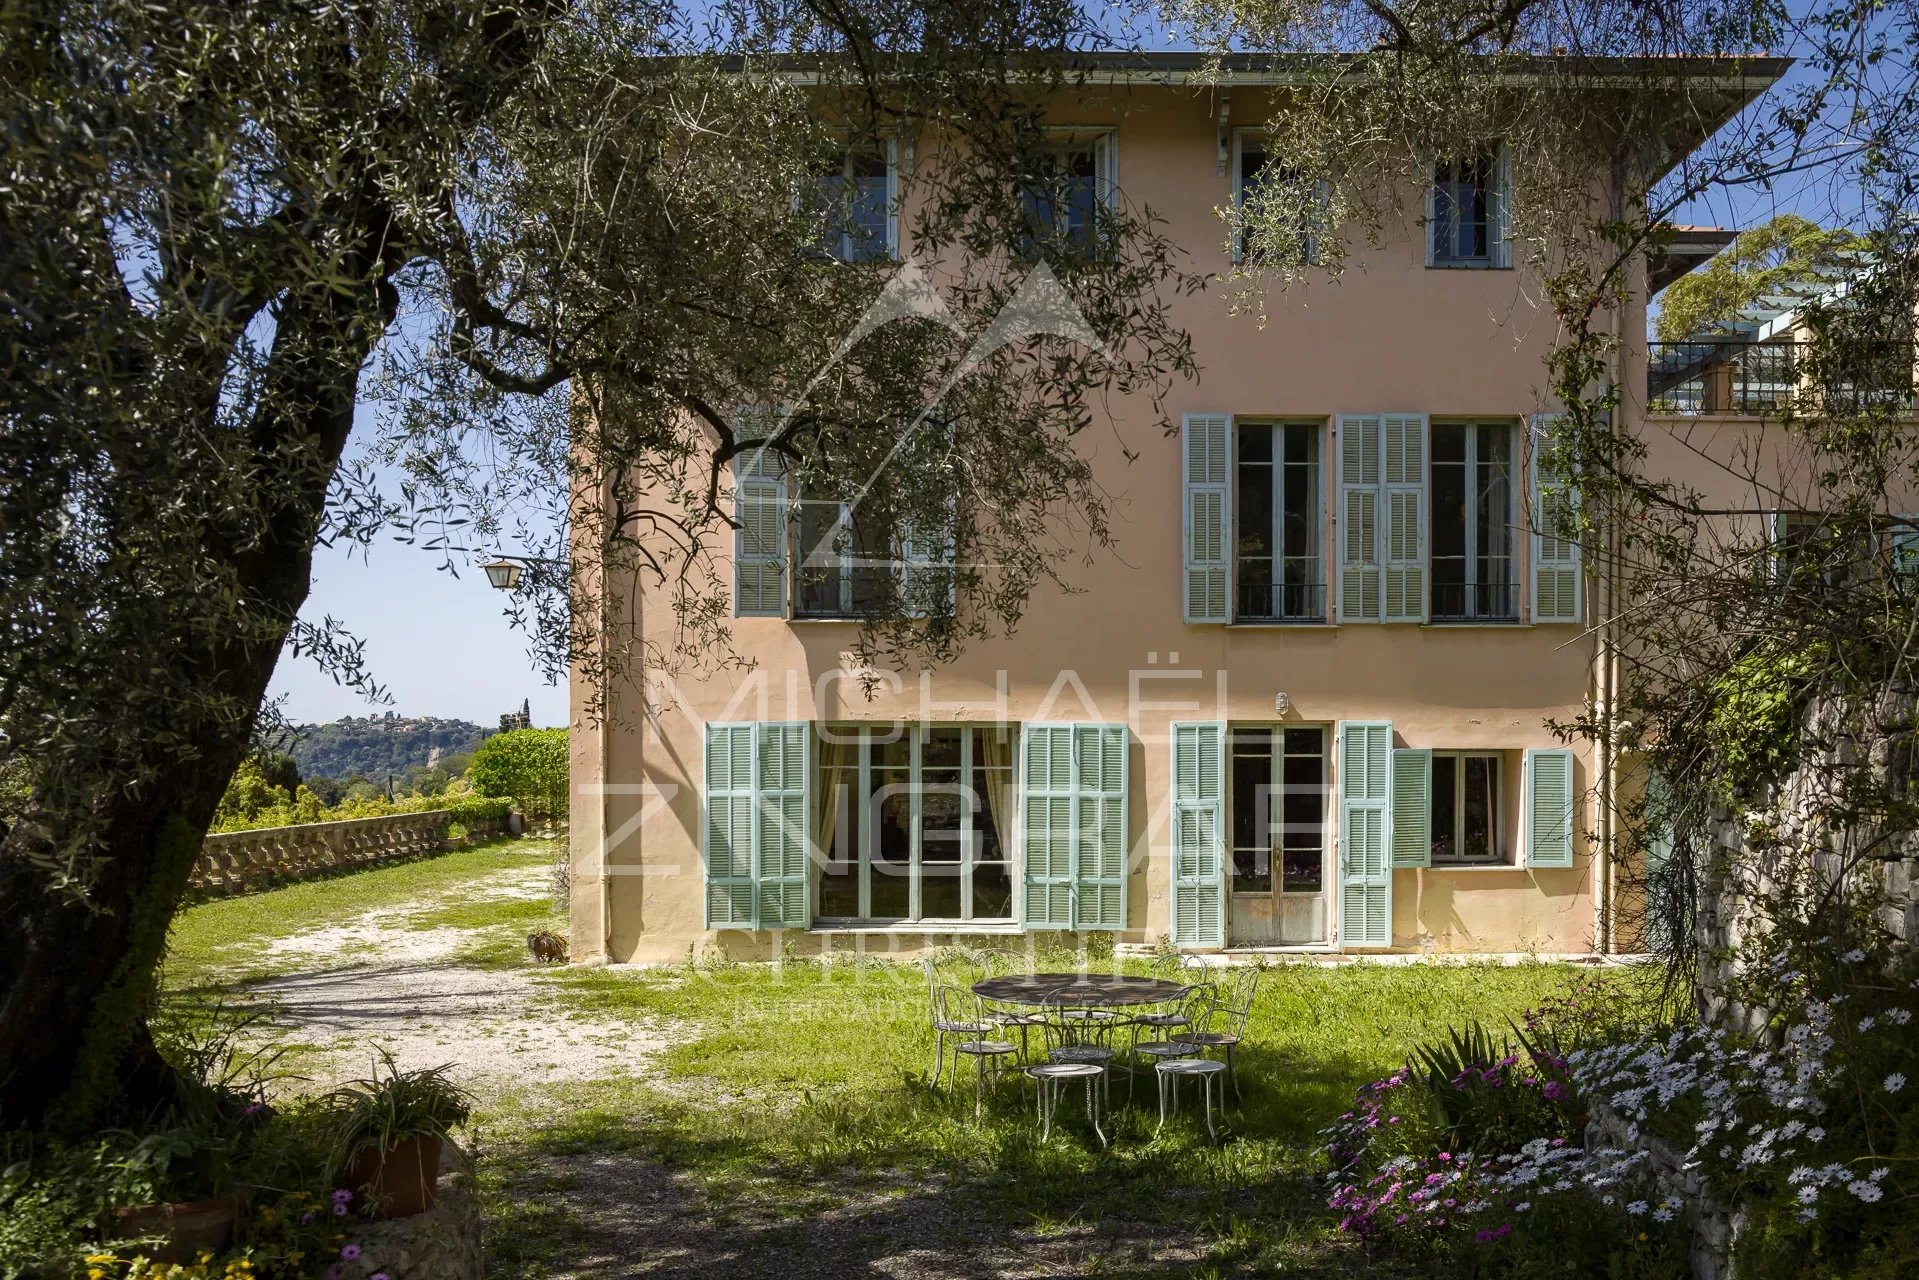 Bastide Property for sale in Gairaut Nice